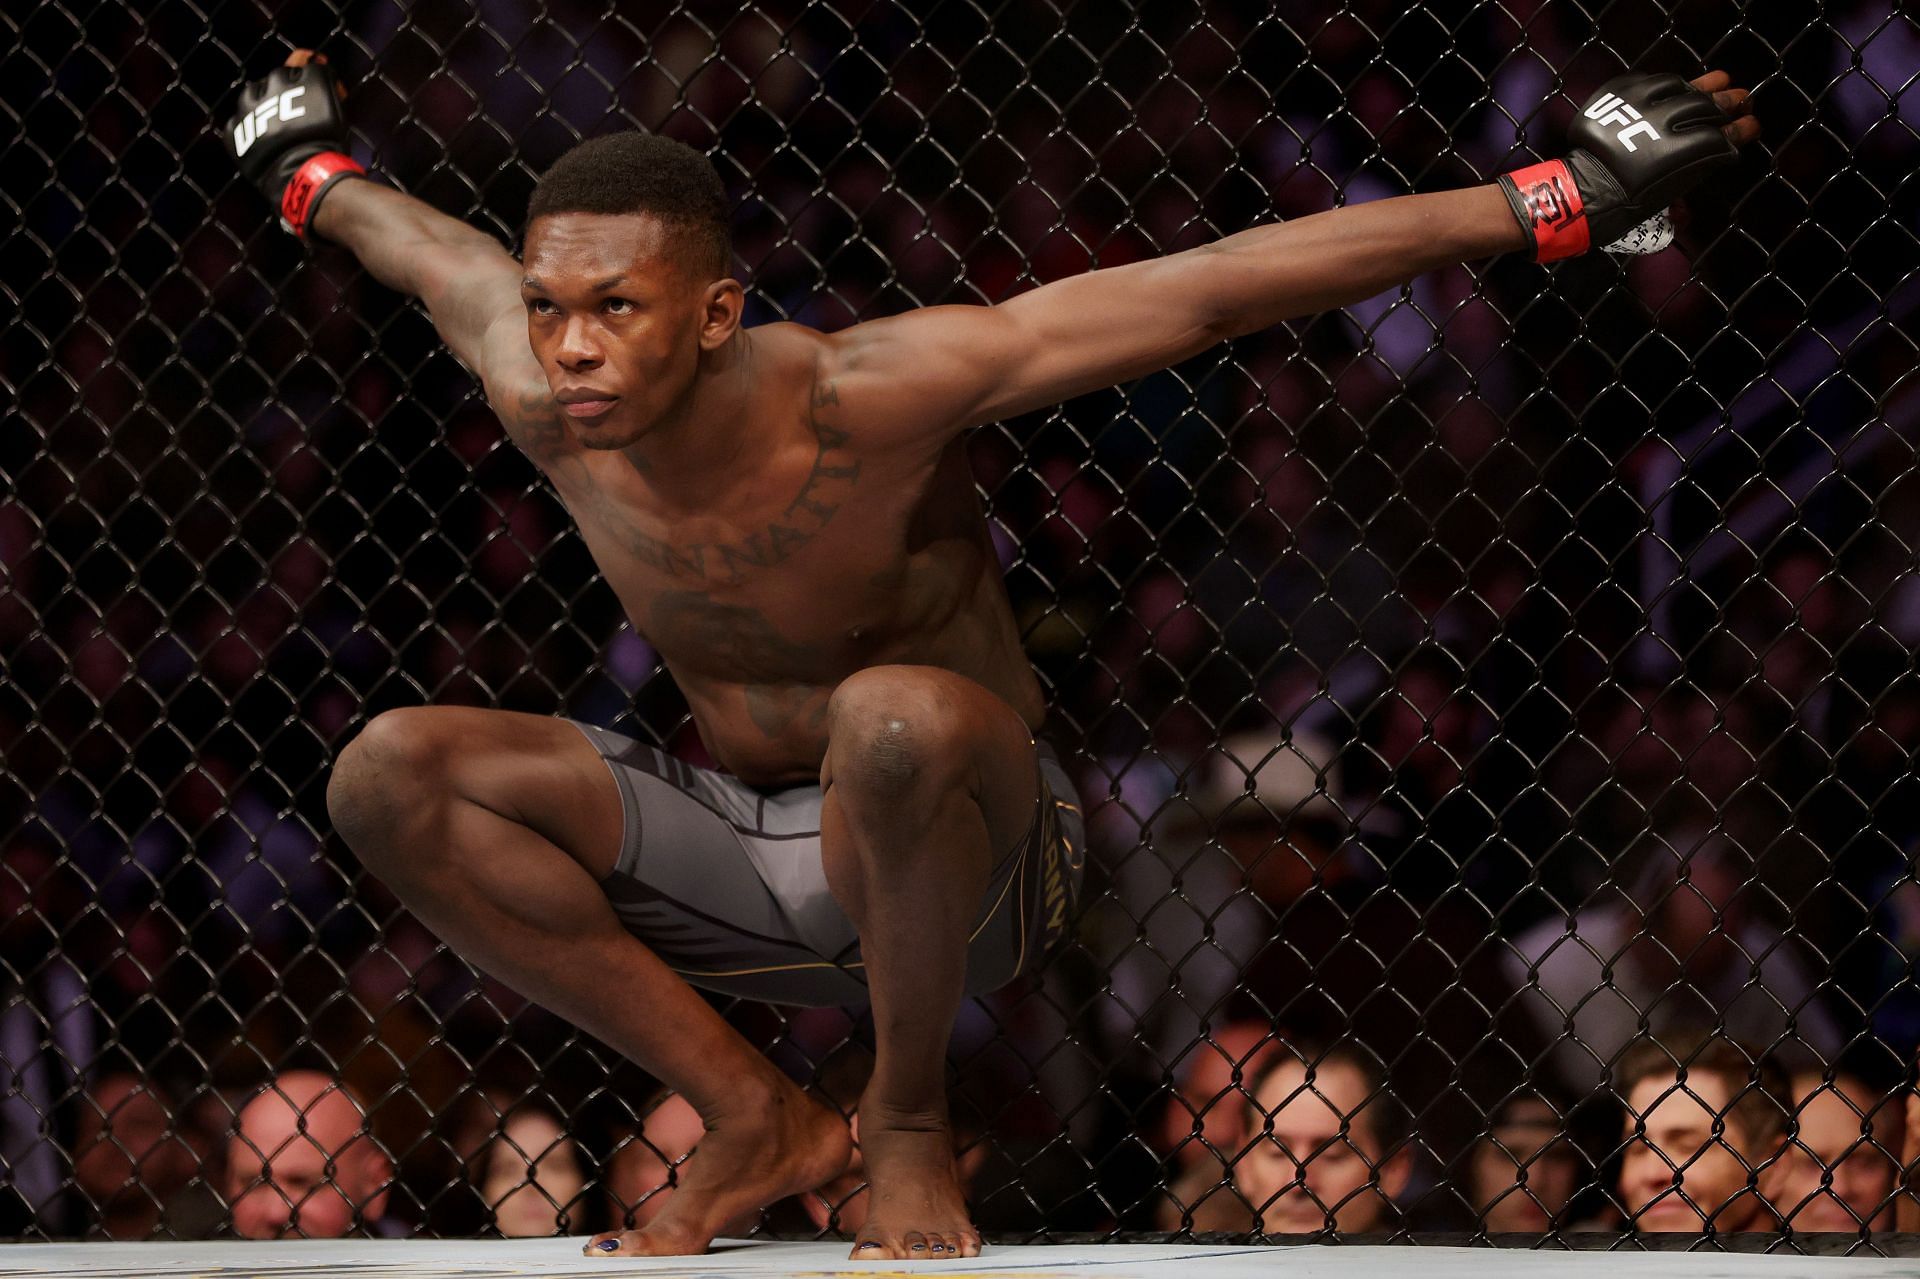 Watch Israel Adesanya goes on a takedown spree as he prepares for title defense at UFC 276